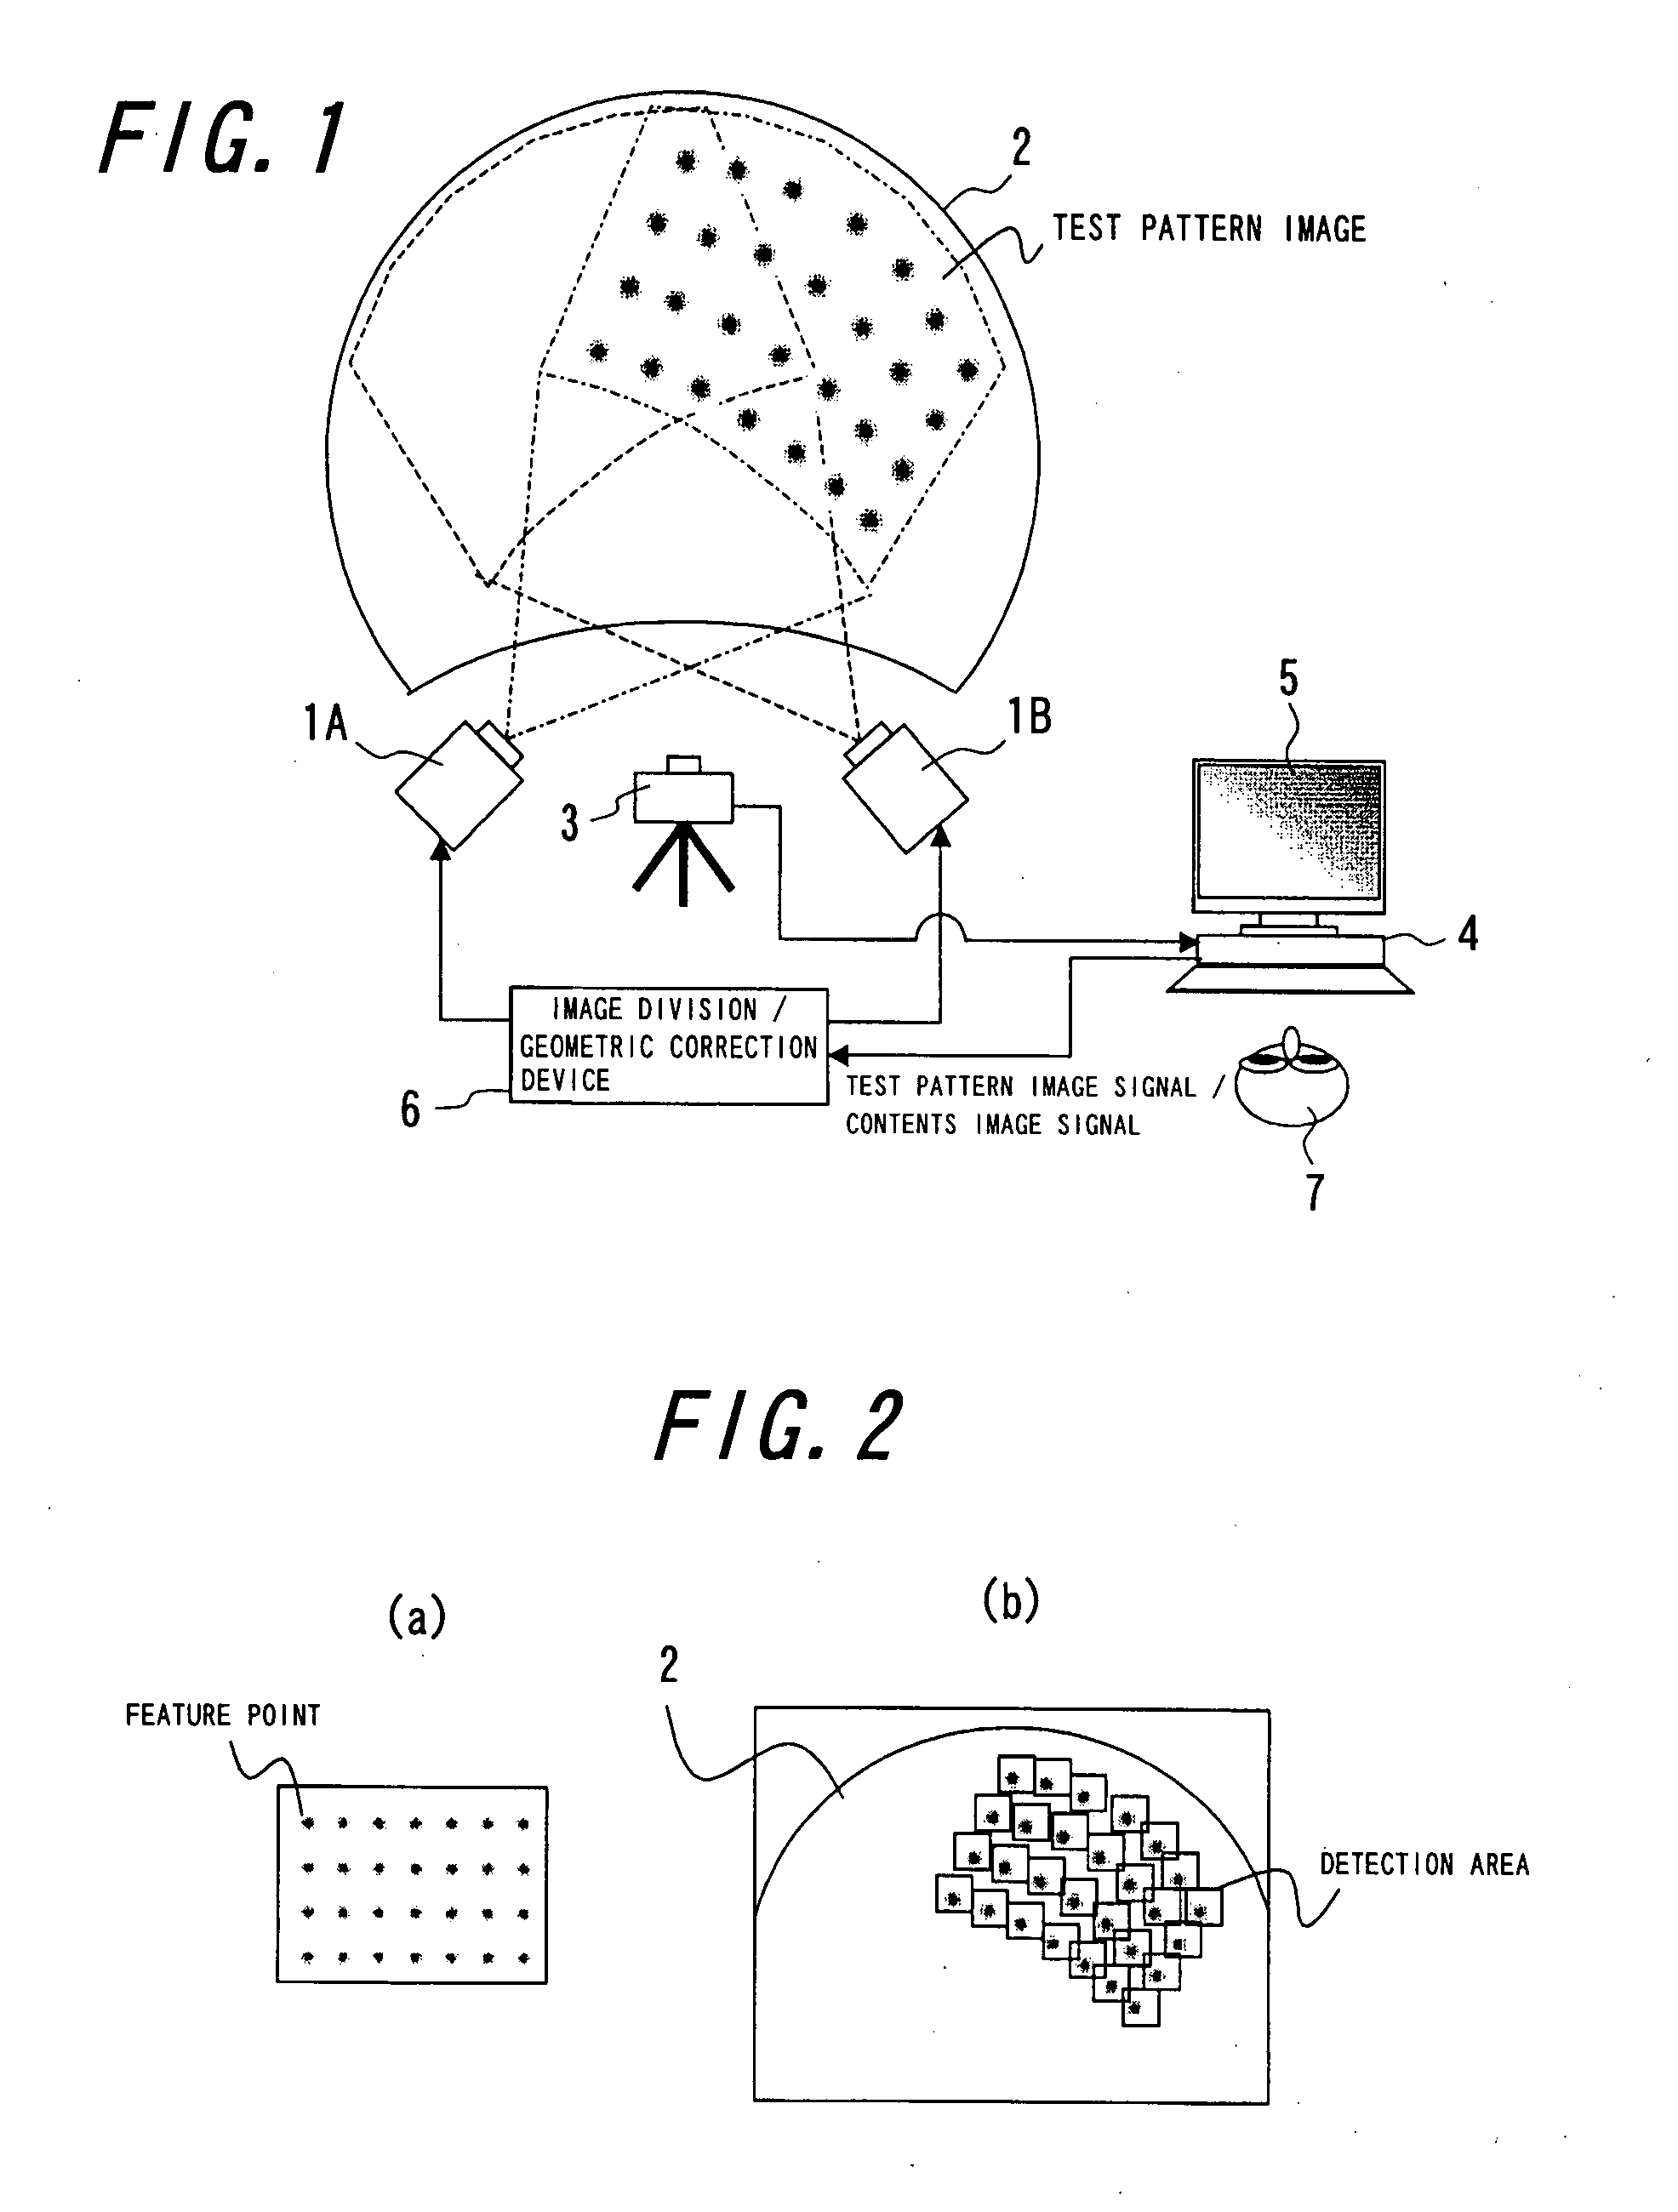 Geometric Correction Method in Multi-Projection System